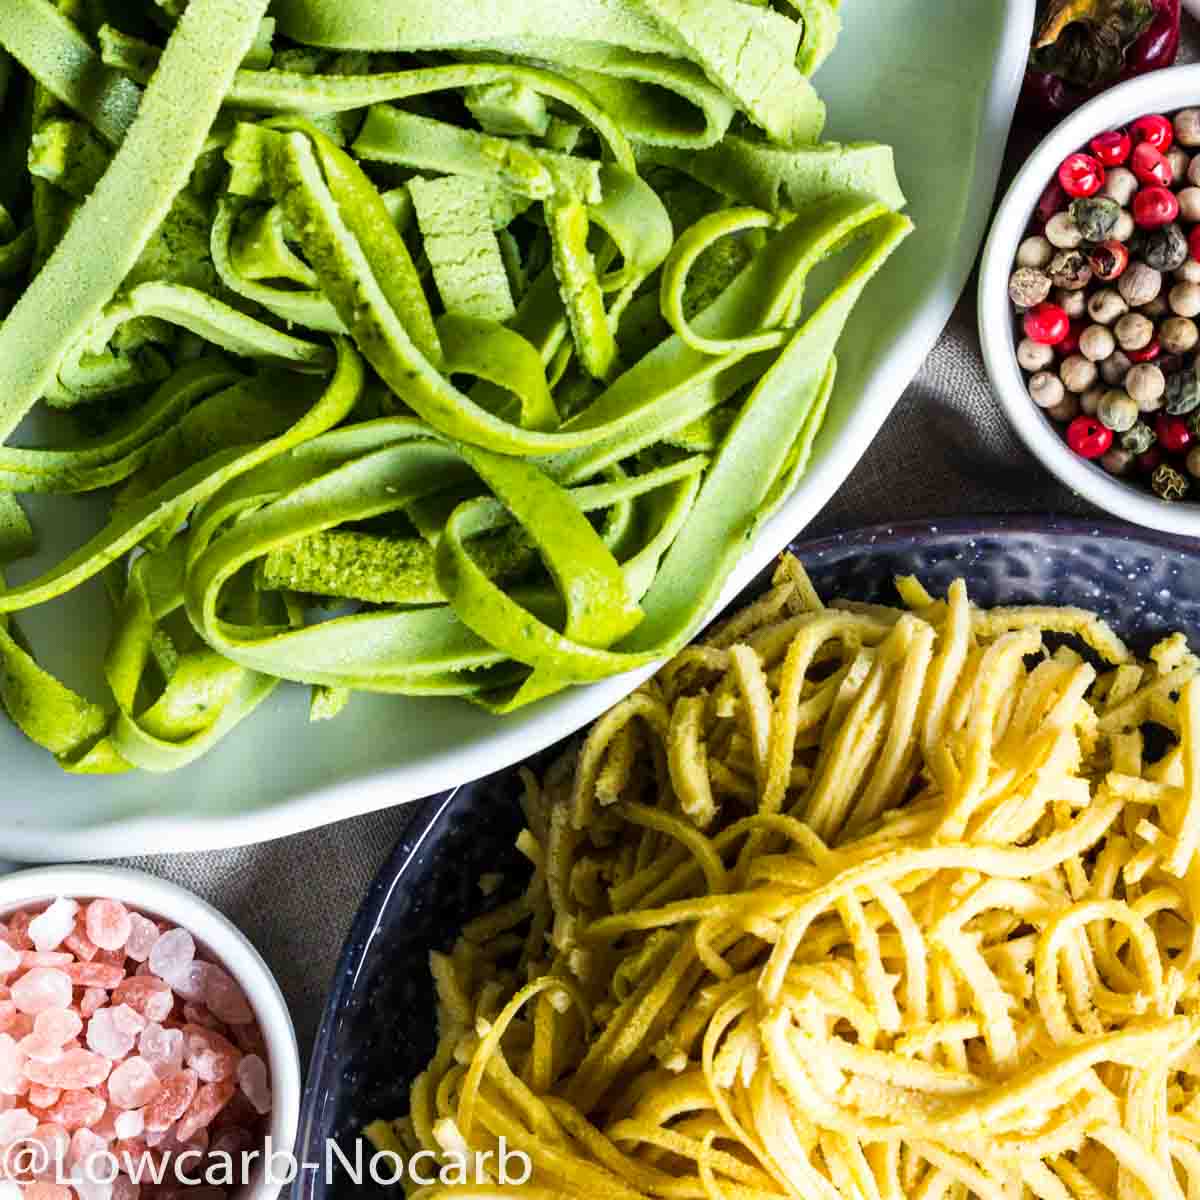 Low-Carb Homemade Pasta Options: Delicious and Nutritious Alternatives